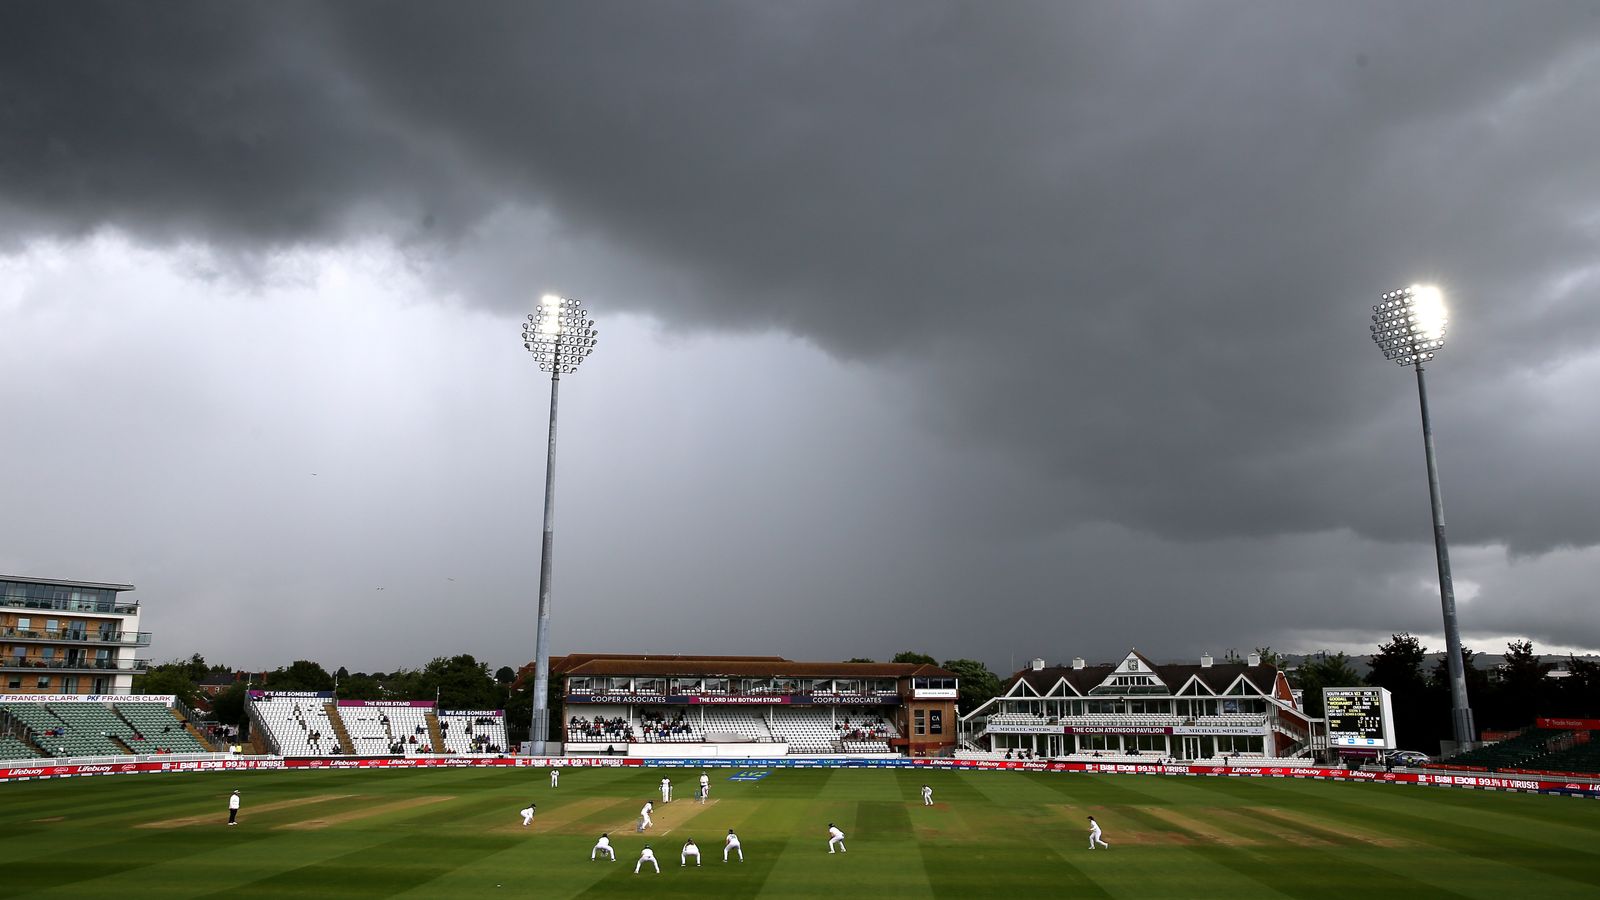 England Thwarted By Rain And Dogged South Africa As Women’s Test At Taunton Ends In A Draw